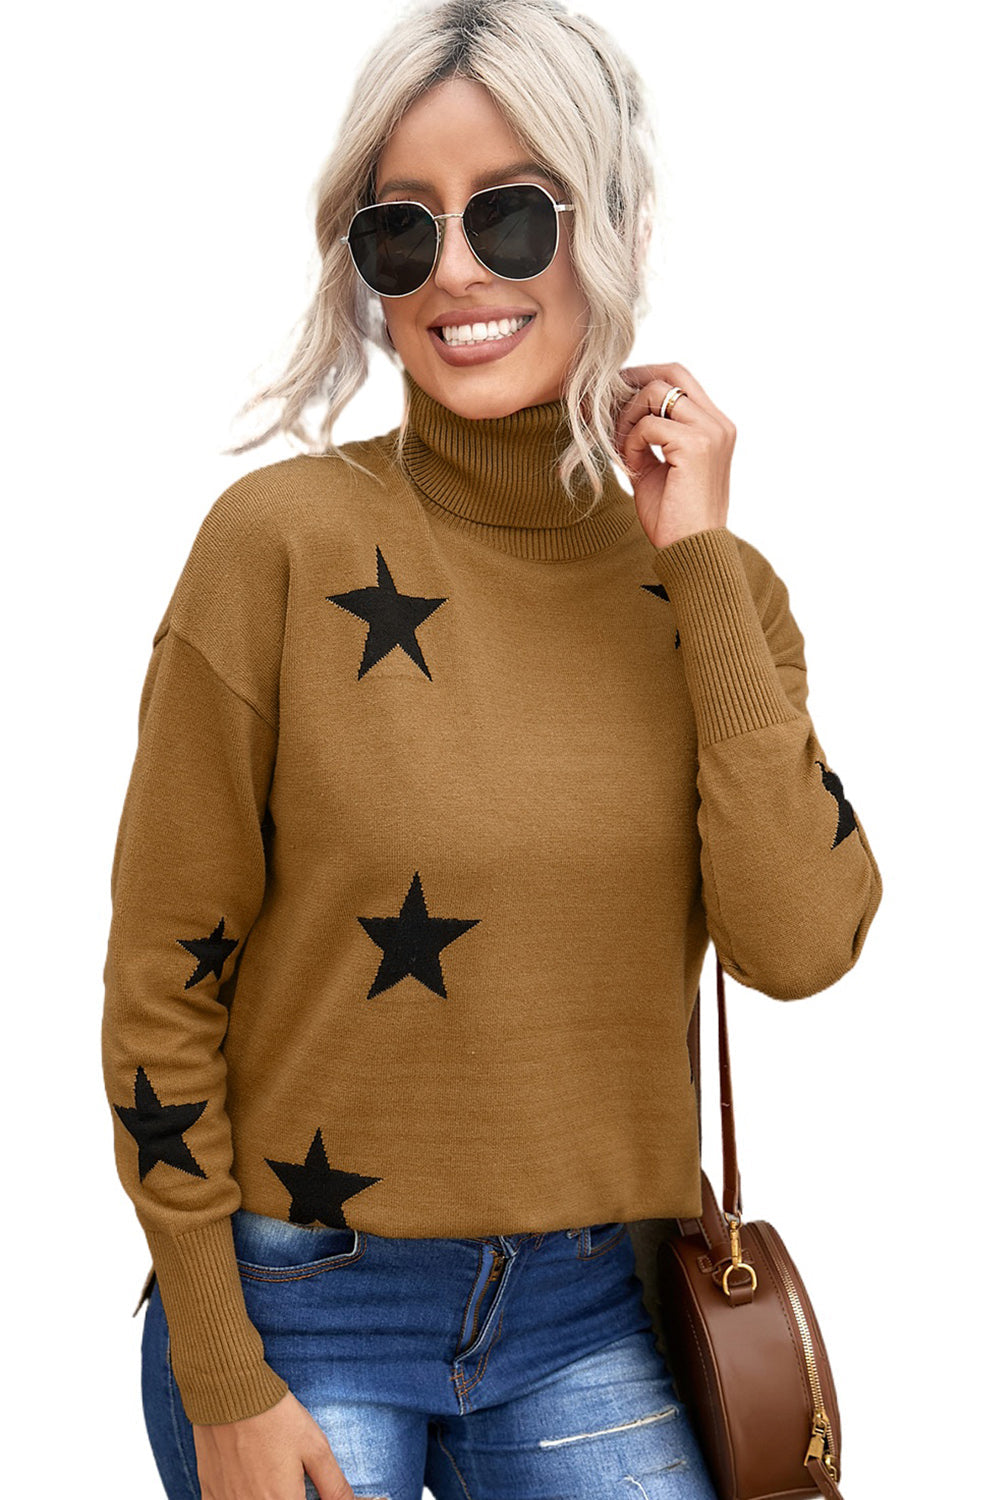 Turtleneck Dropped Sleeve Star Print Sweater - Passion of Essence Boutique